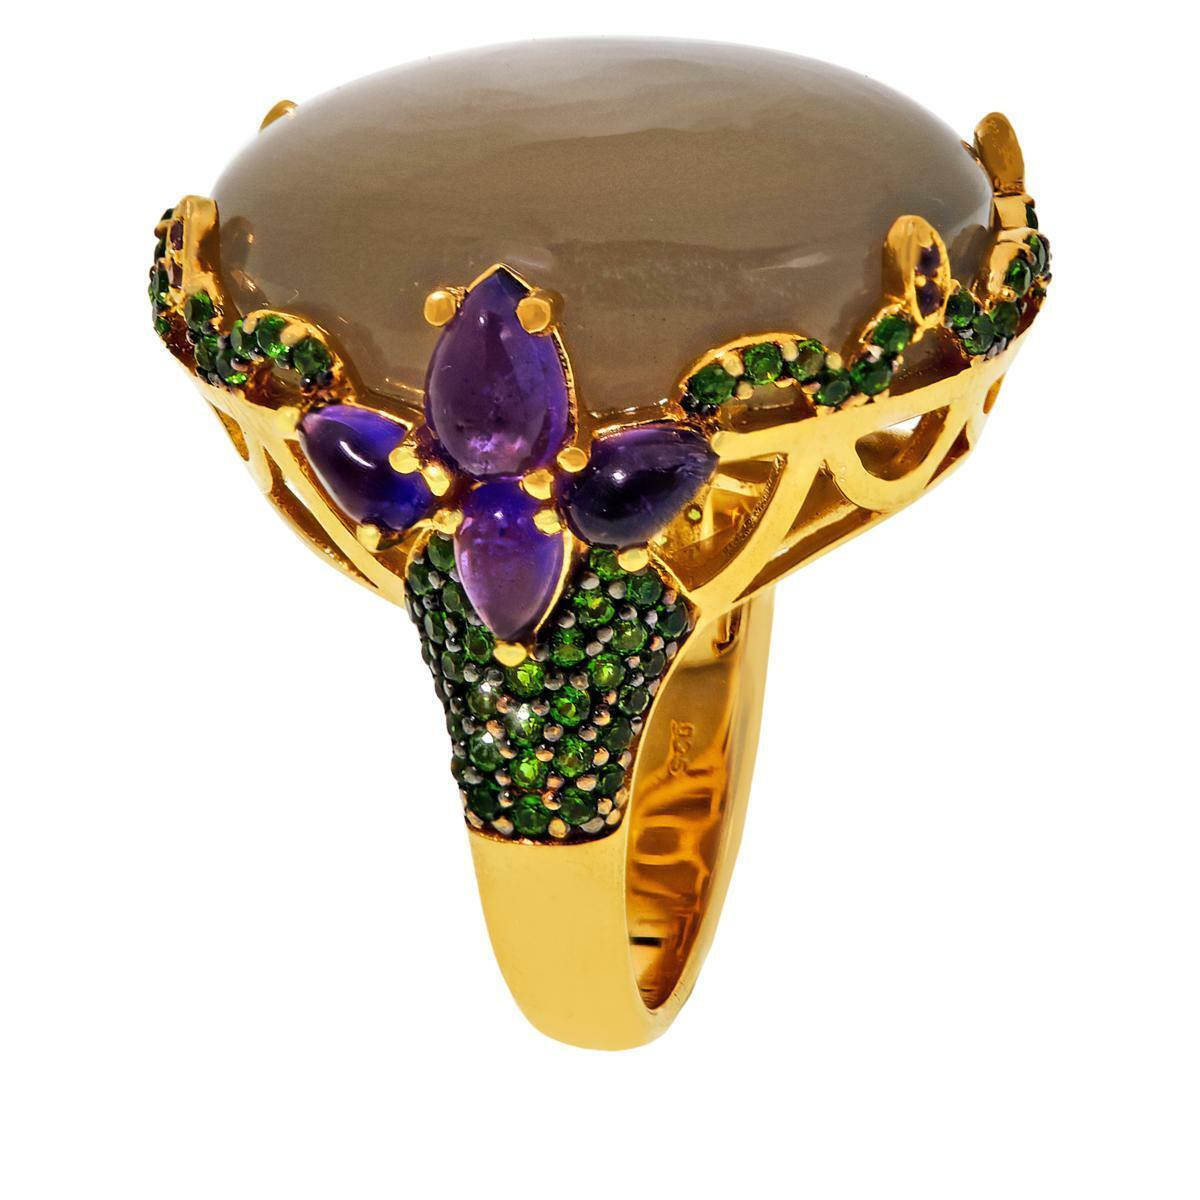 Colleen Lopez Gold-Plated Moonstone, Chrome Diopside and Amethyst Ring, Size 10